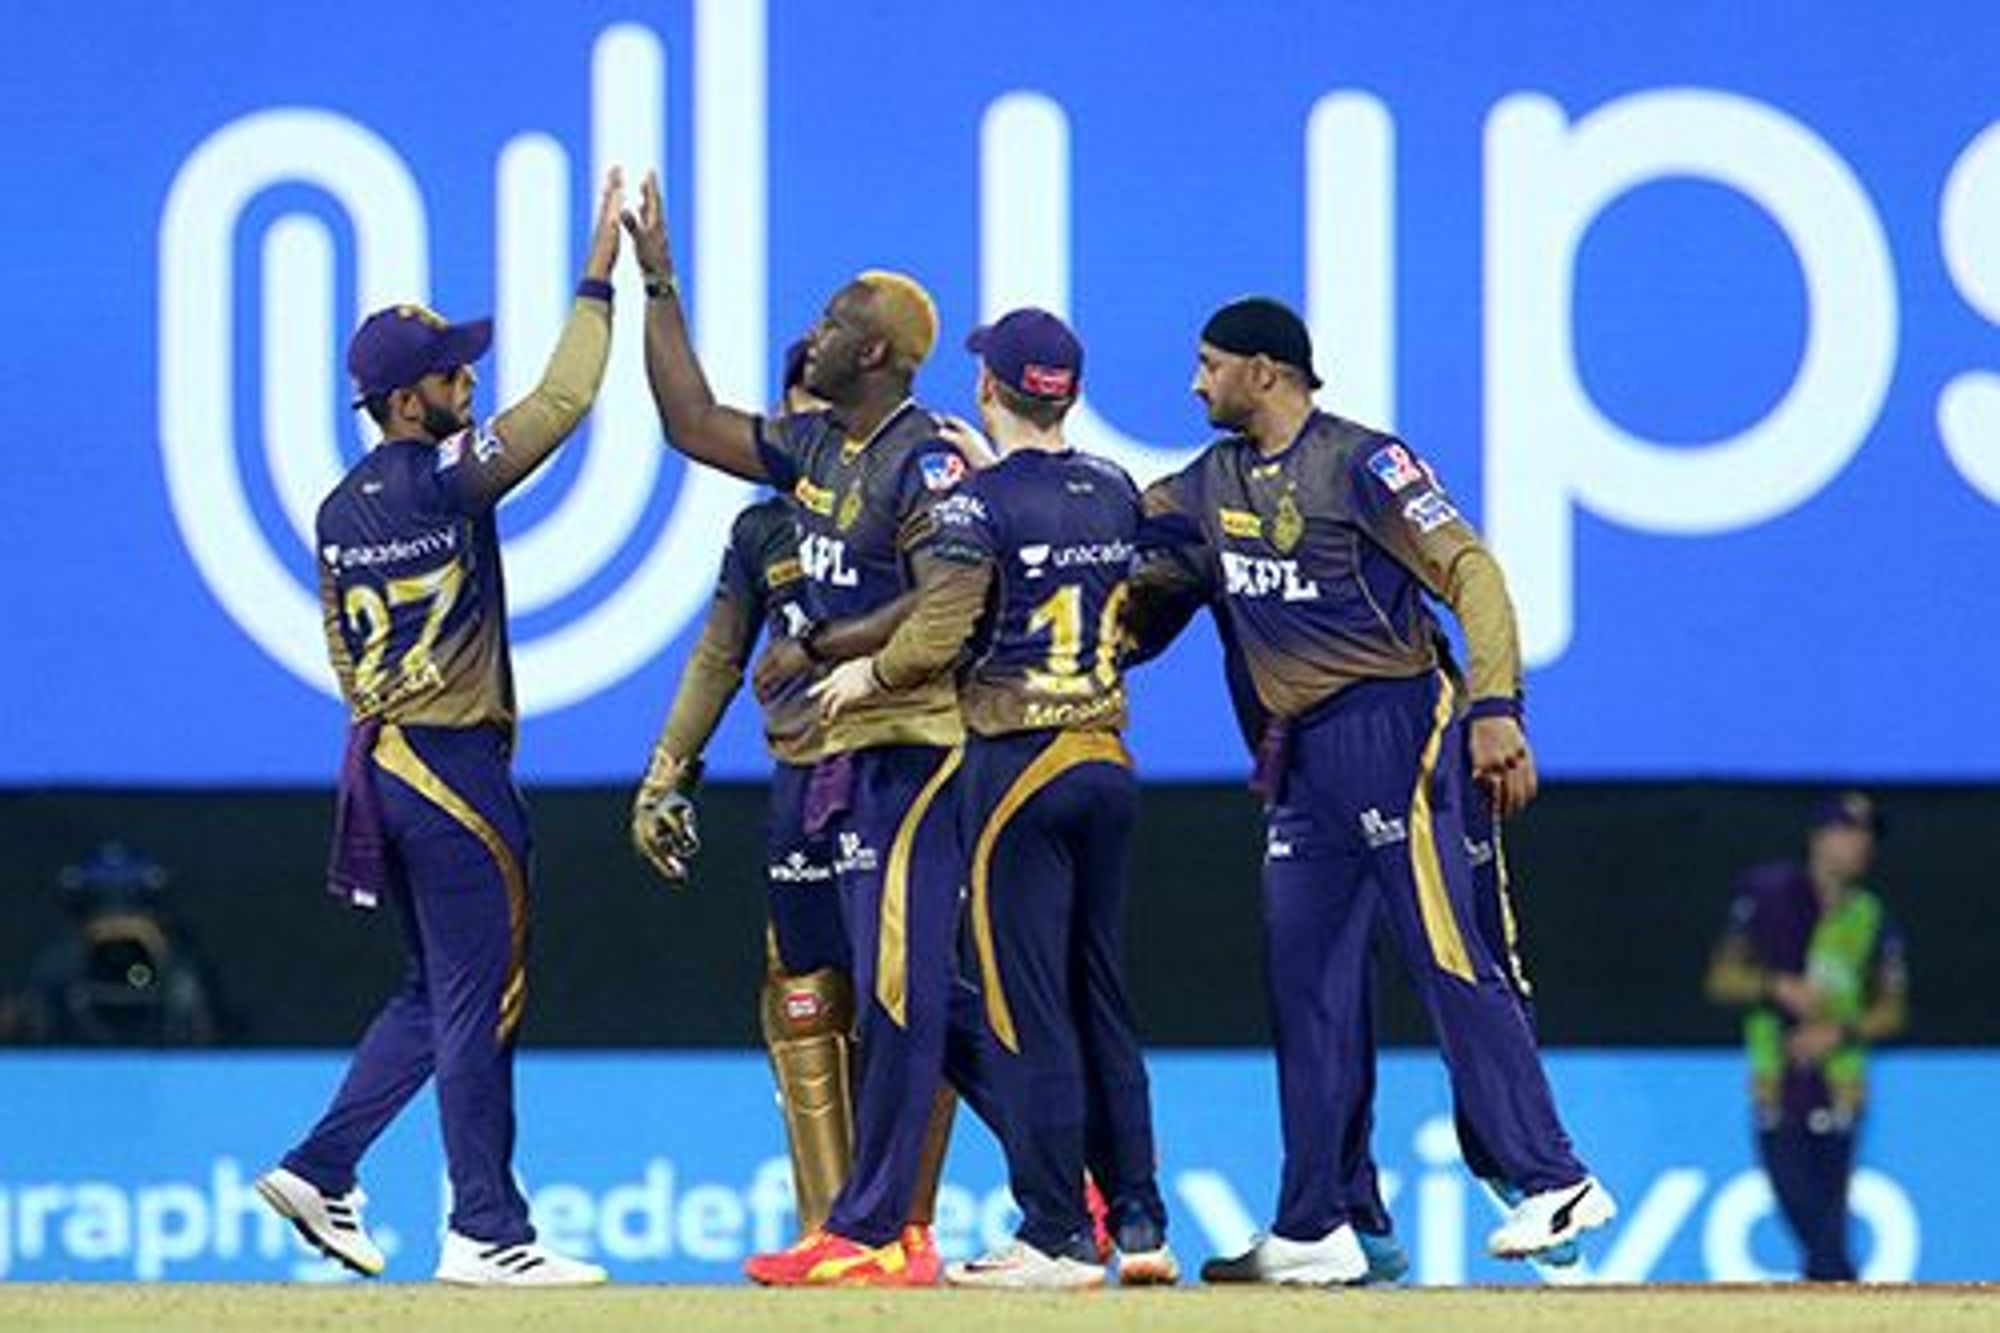 KKR have won 1 and lost 1 match in IPL 2021 so far | BCCI/IPL